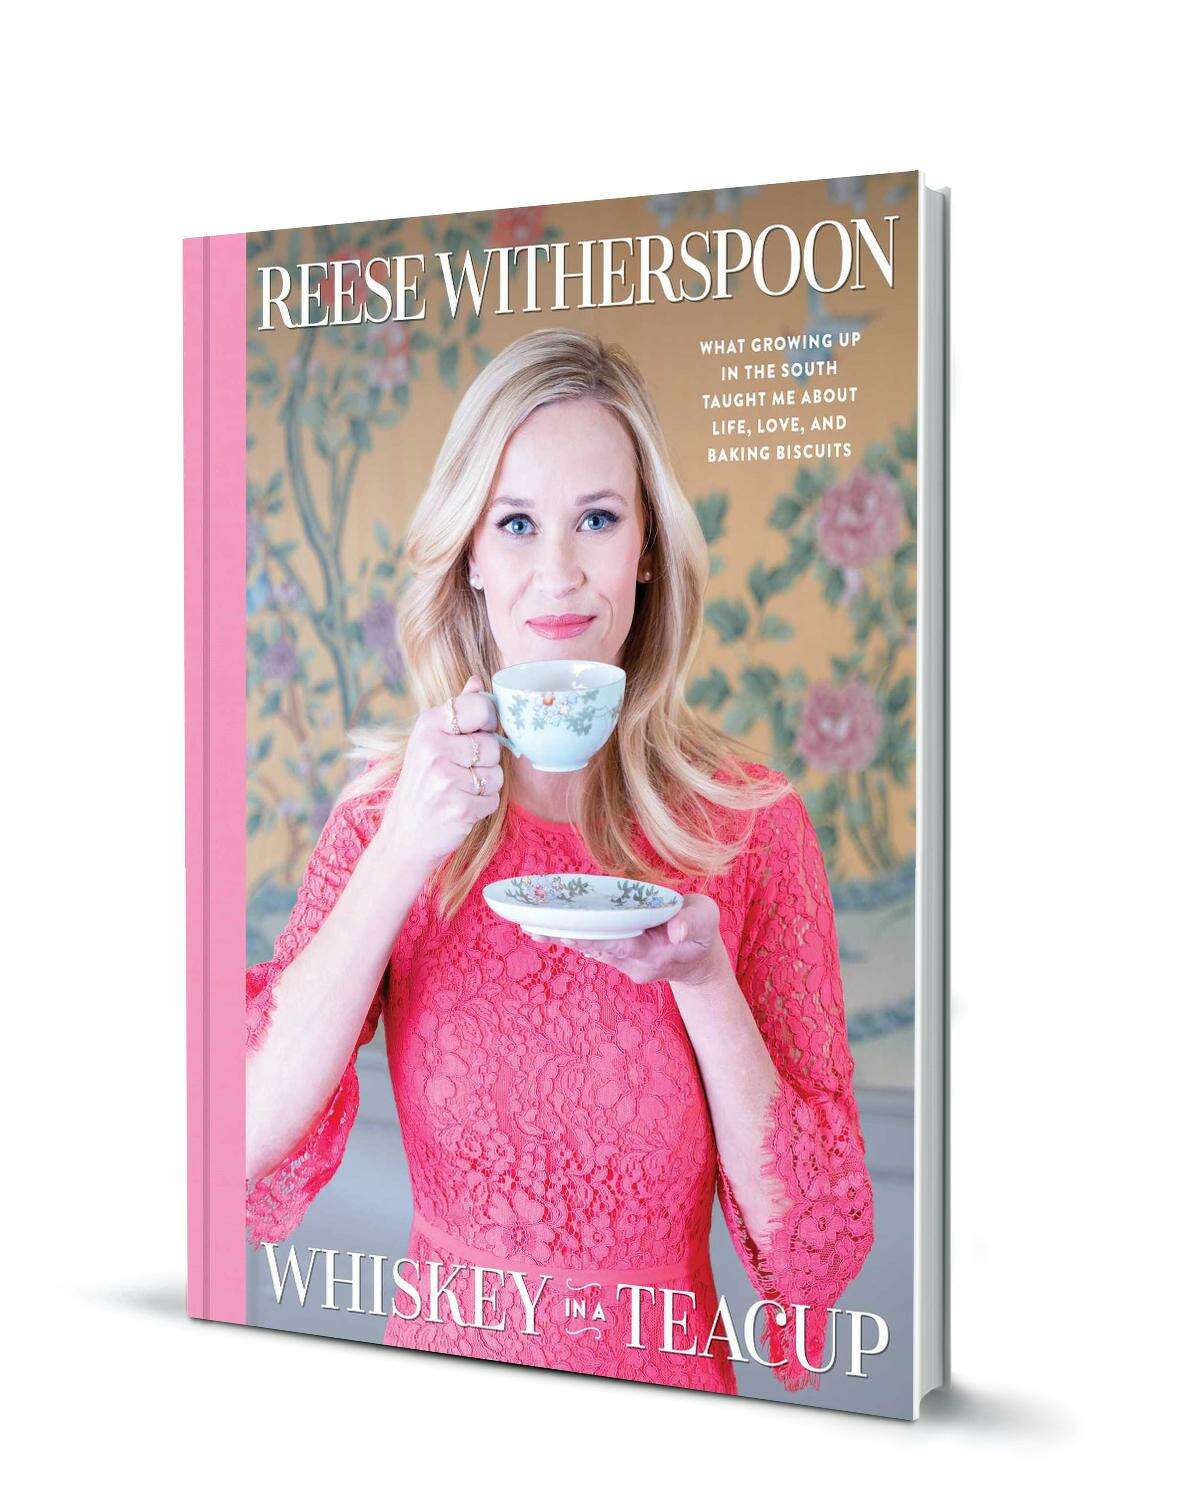 The cover of Reese Witherspoon's new book.